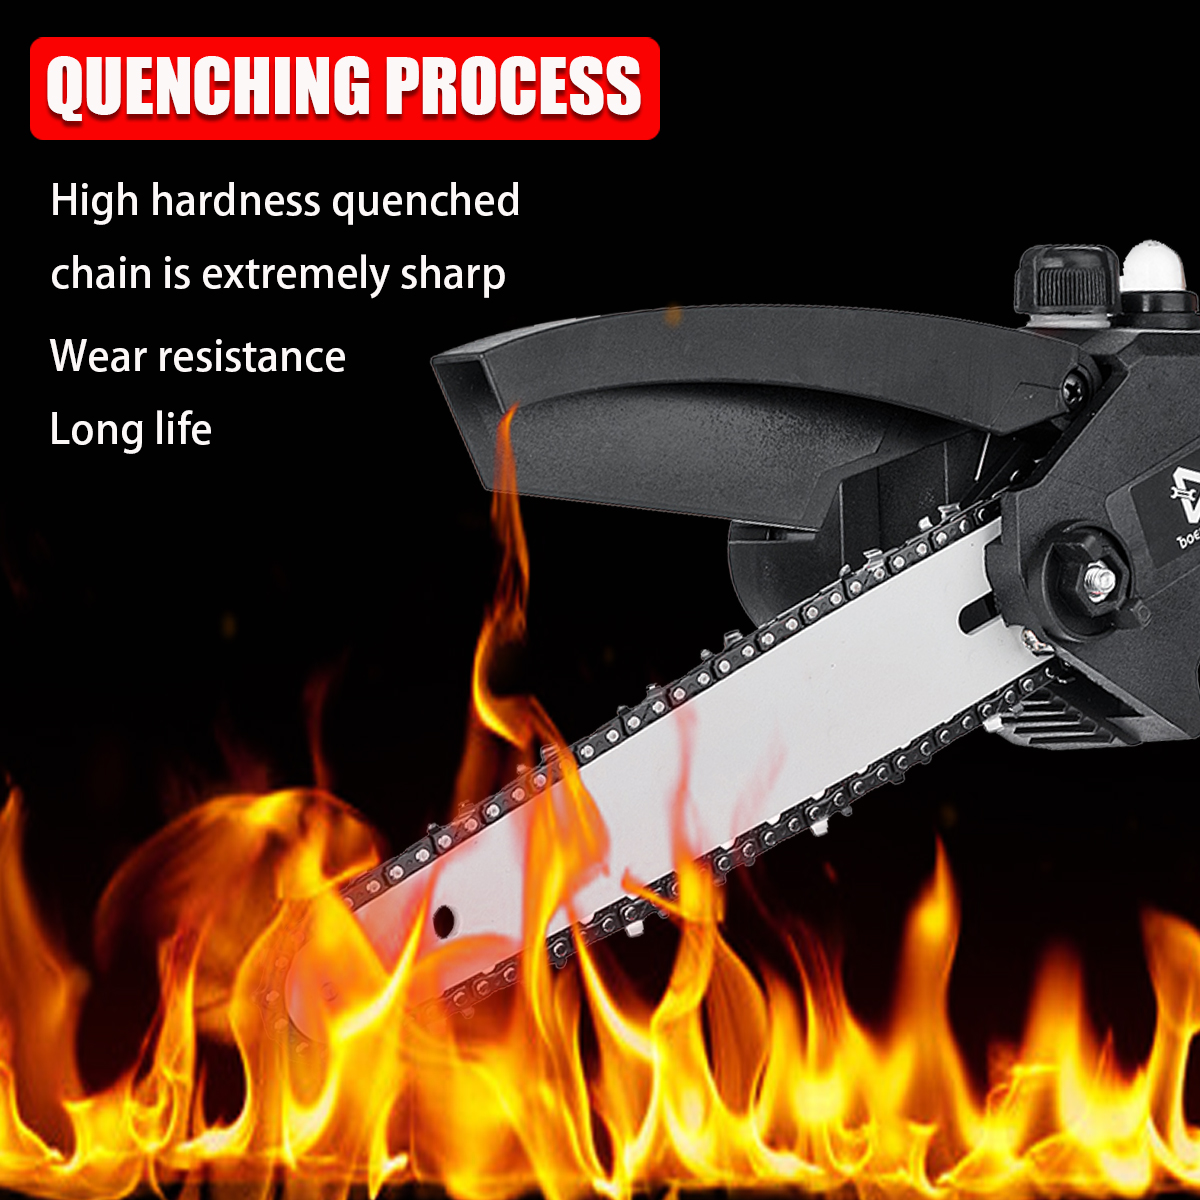 Doersupp-88VF-8-Inch-Portable-Electric-Saw-Pruning-Chain-Saws-3000W-5MS-Rechargeable-Woodworking-Pow-1915311-3